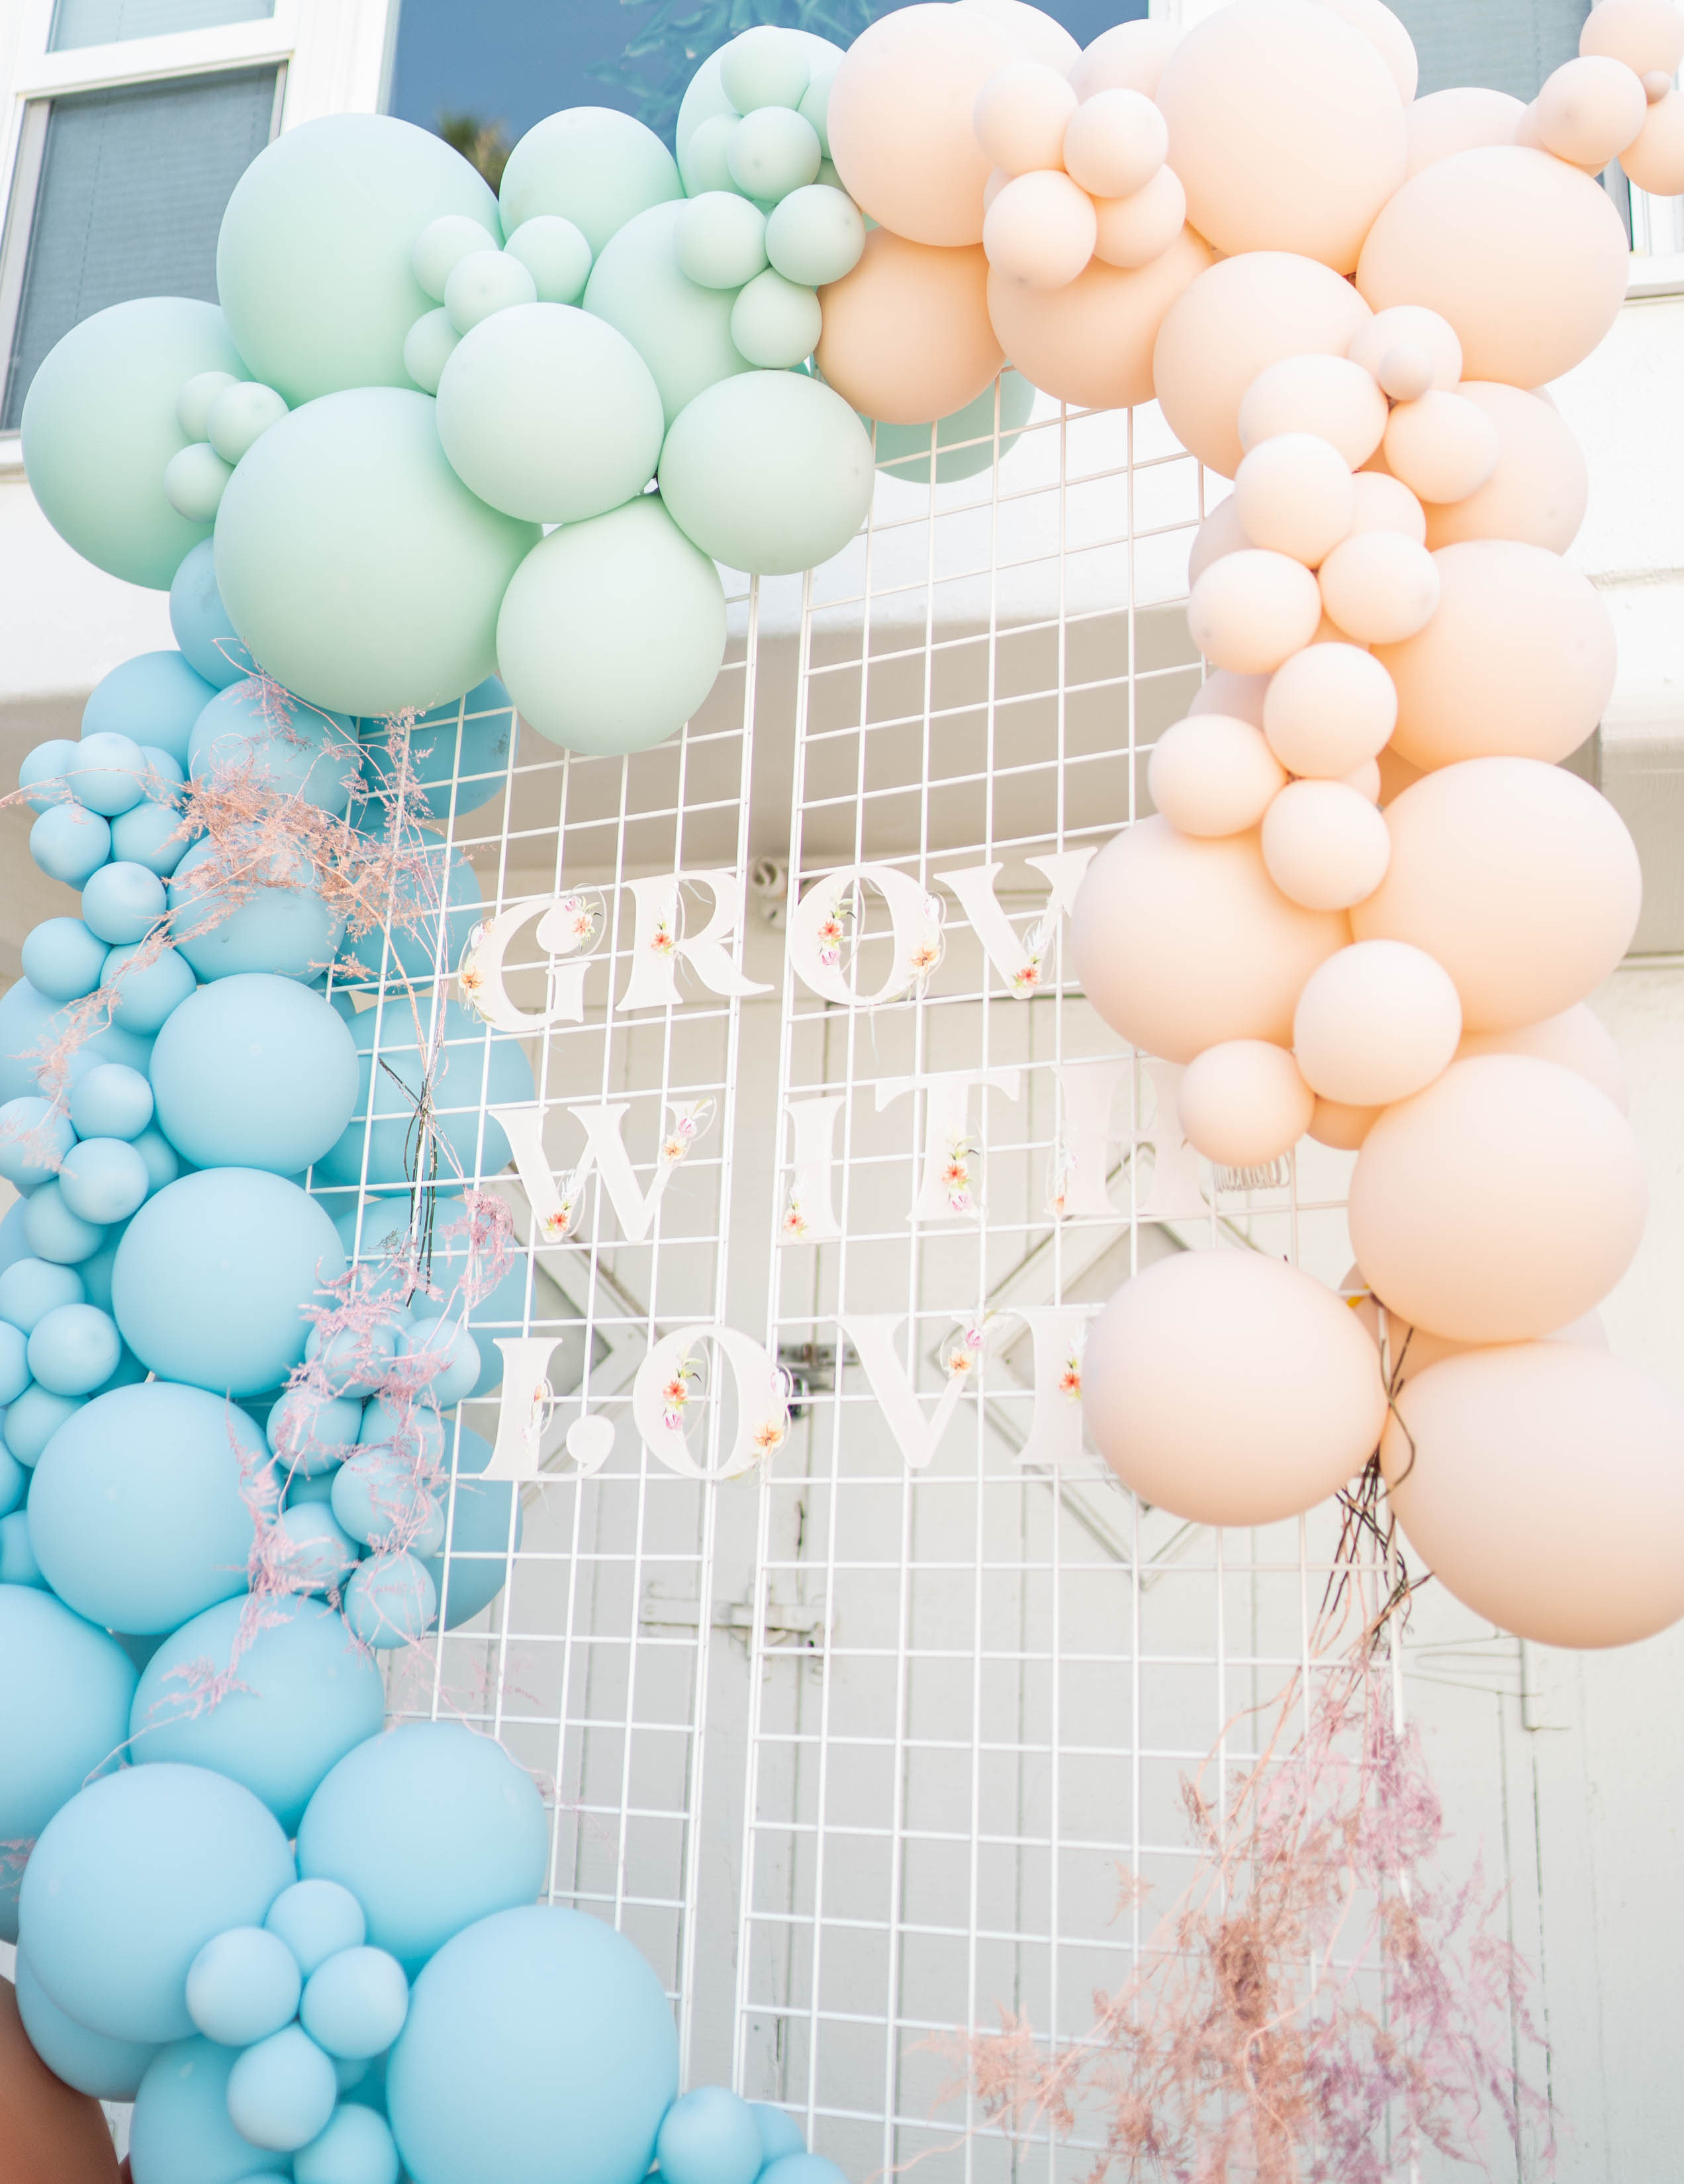 balloon backdrop
birthday inspiration
fig and whiskey
photo booth set up